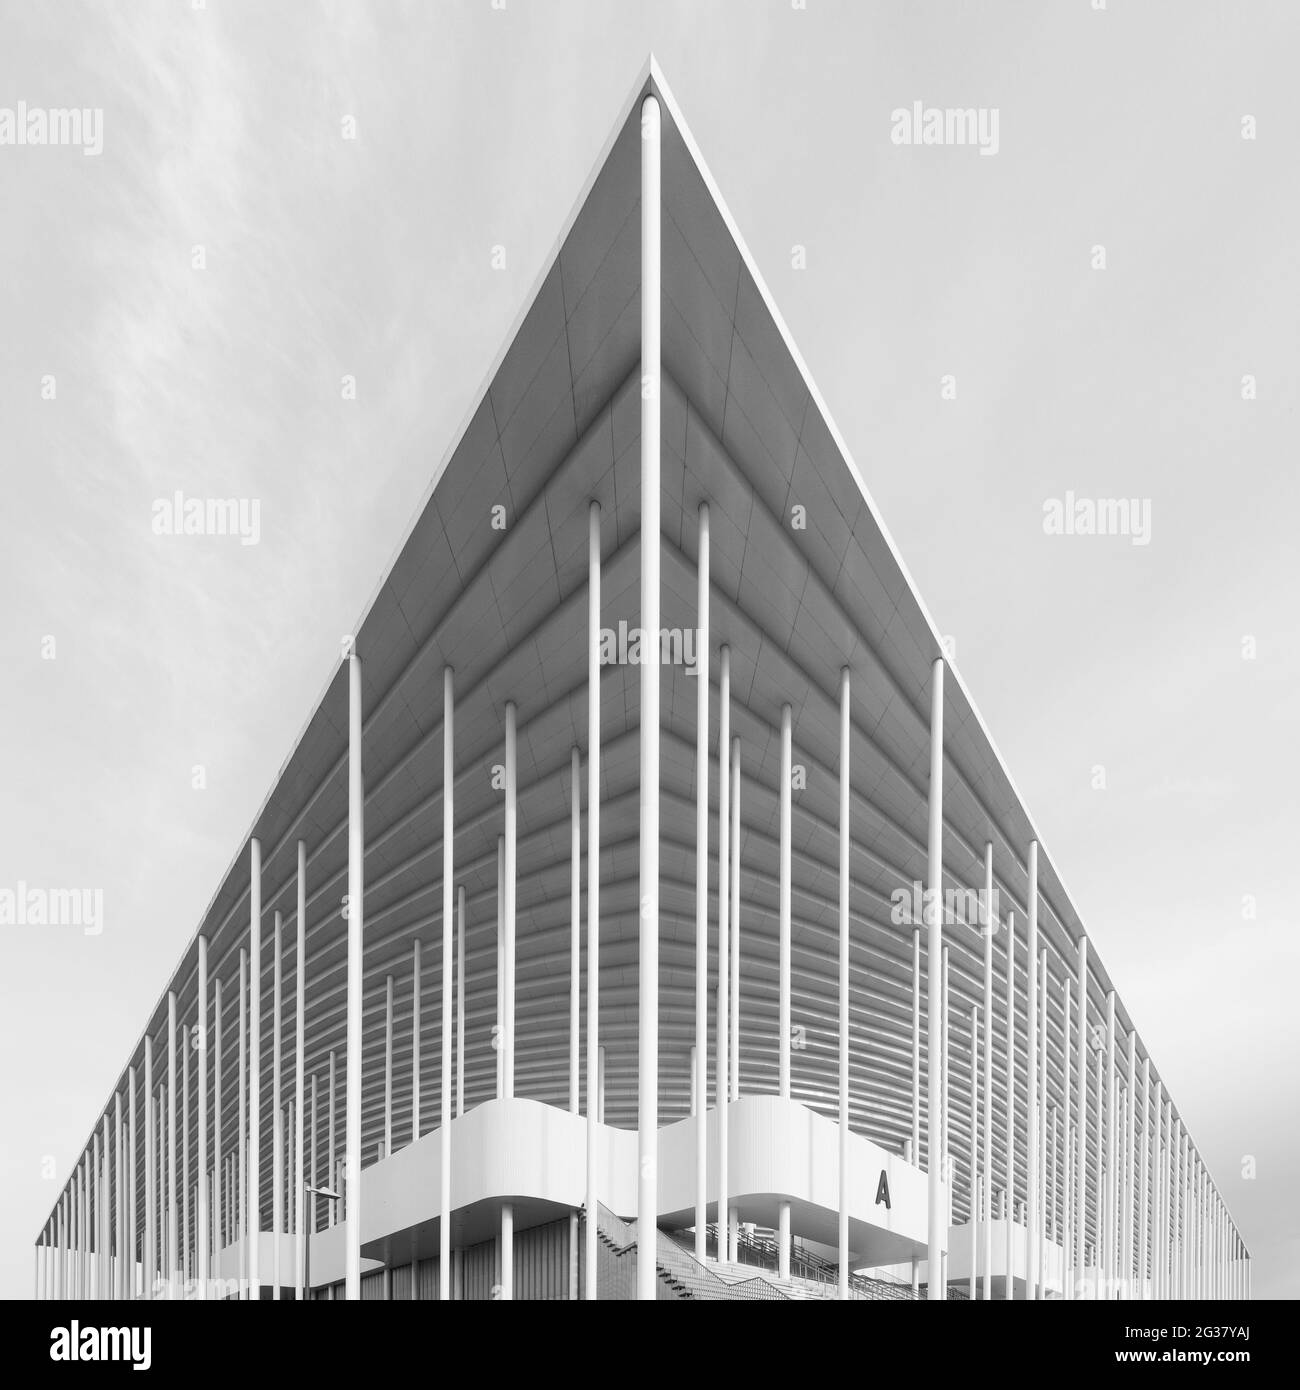 Vertical grayscale shot of architectural details of Matmut Atlantique Stadium in Bordeaux, France Stock Photo